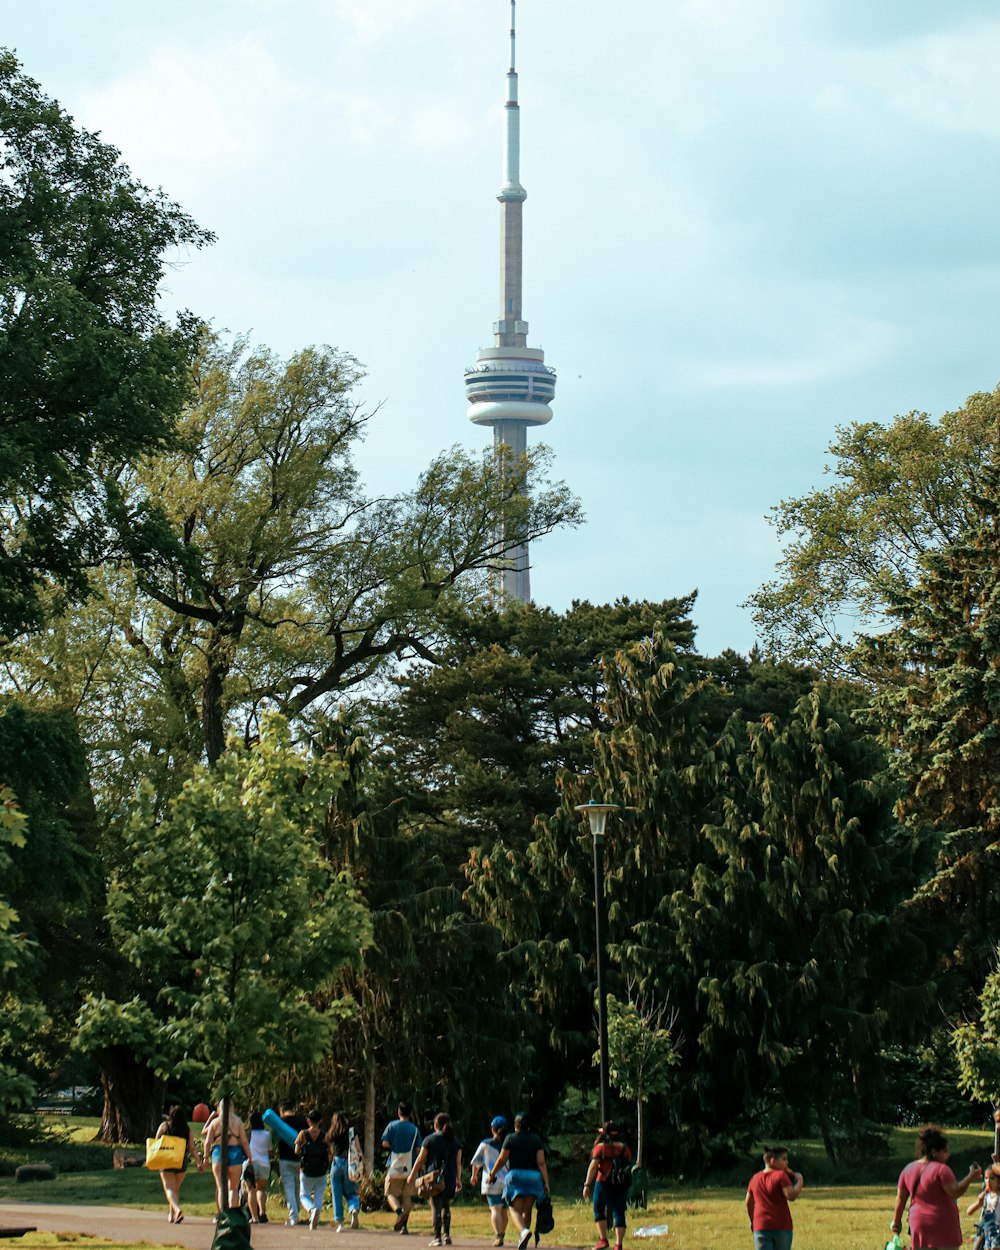 a group of people walking in a park with a tall pointy tower in the background